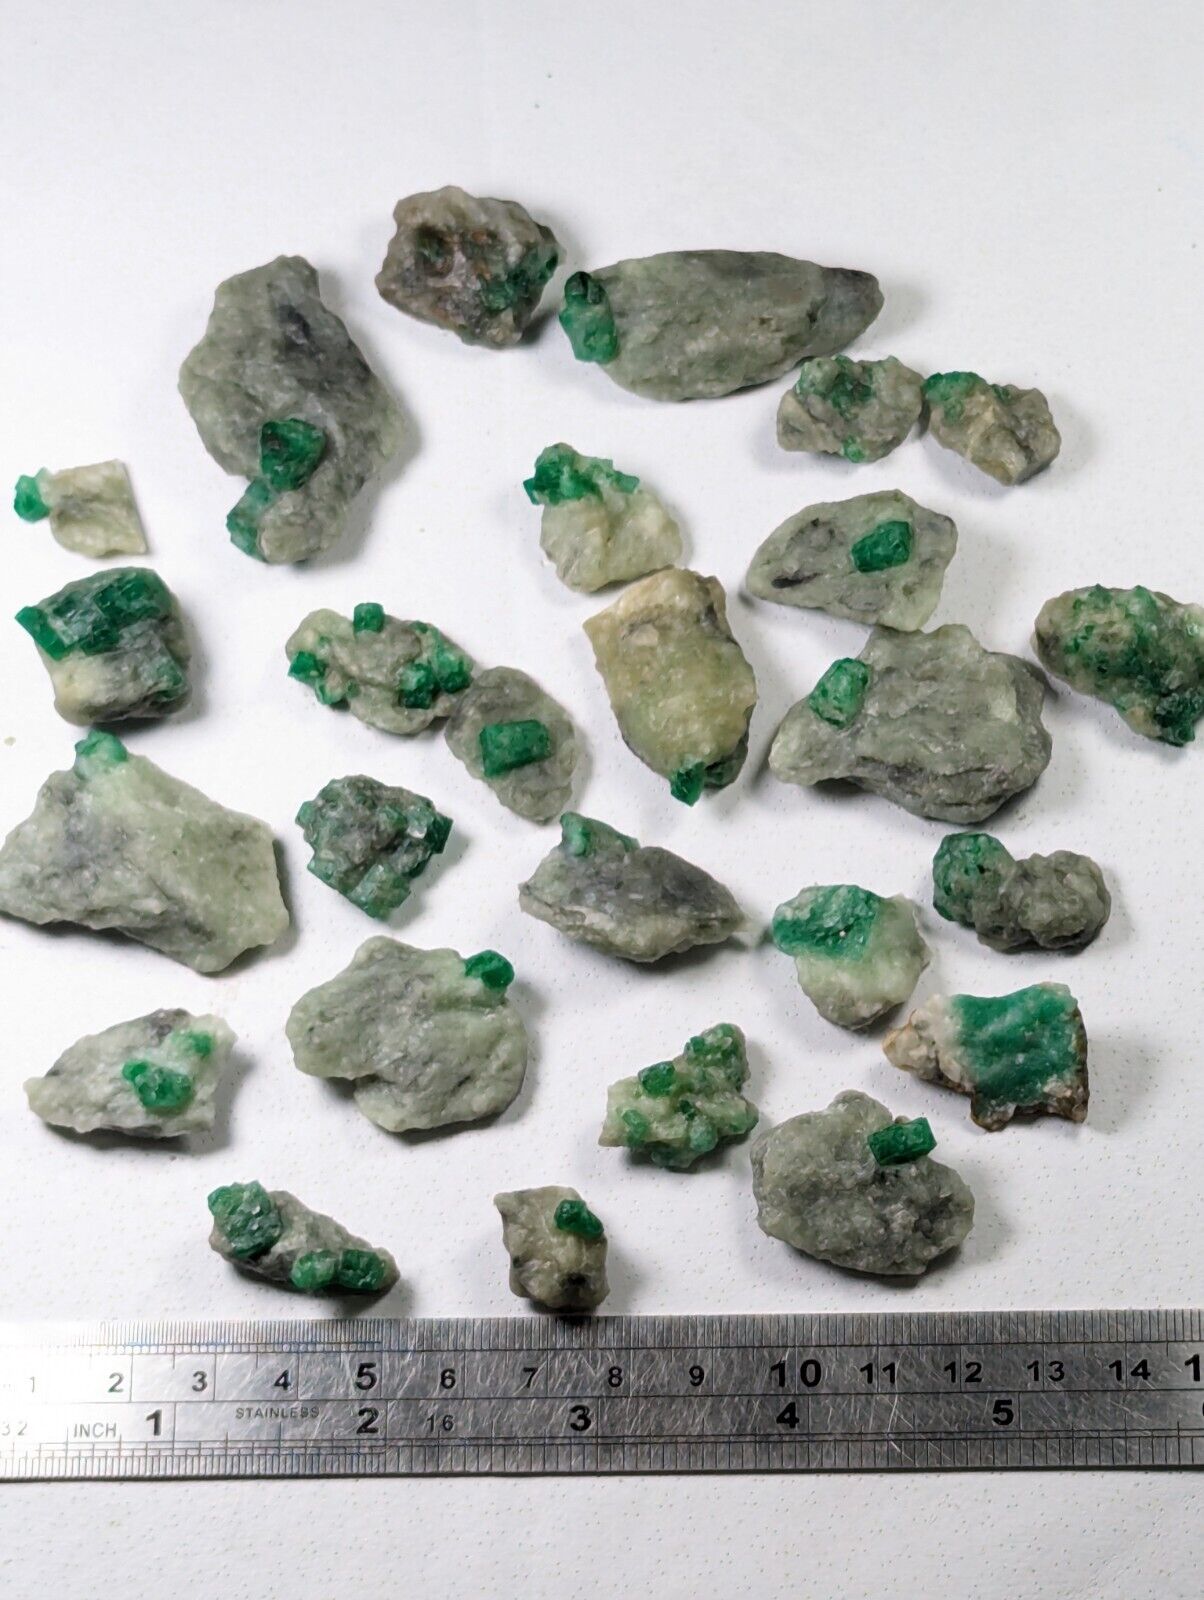 Emerald Crystals On Matrix, 26 Pieces, From Swat Valley, Pakistan.